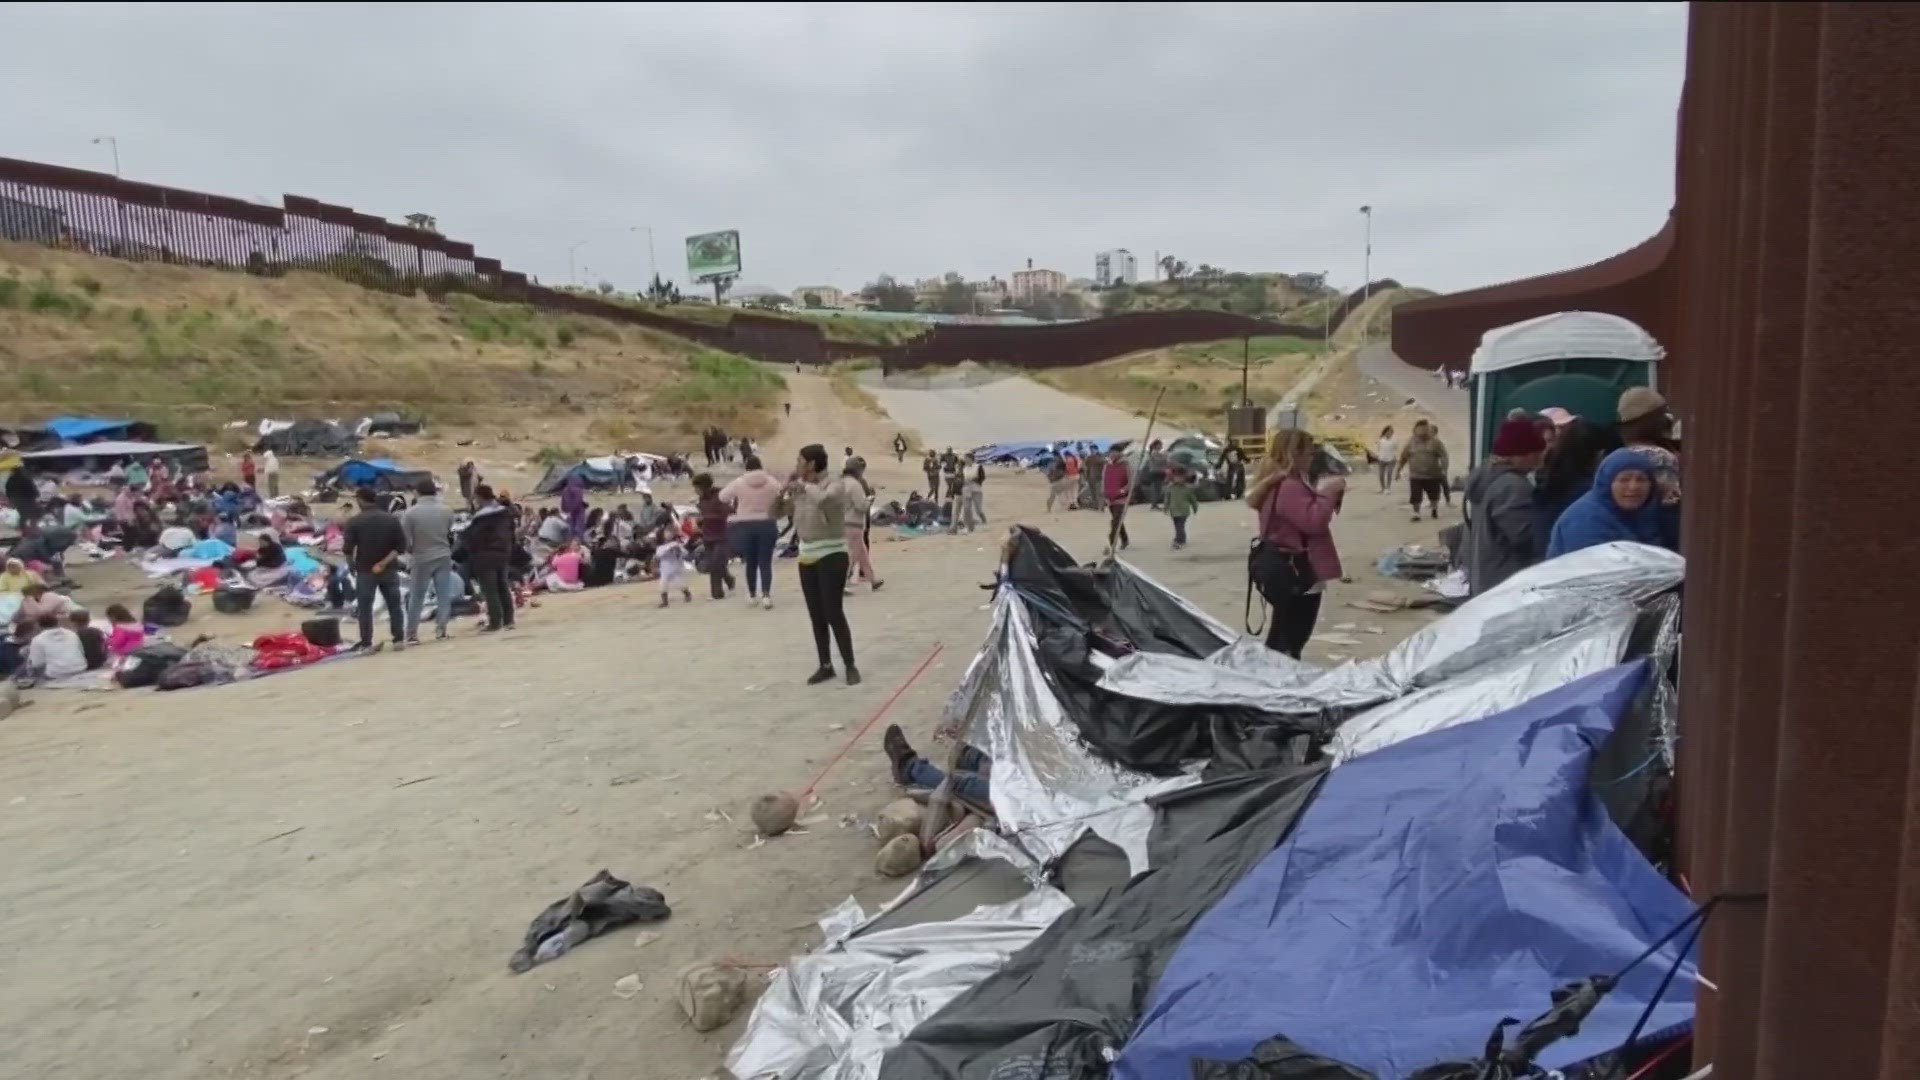 Hundreds of migrants, including several young children, gathered near the border fence